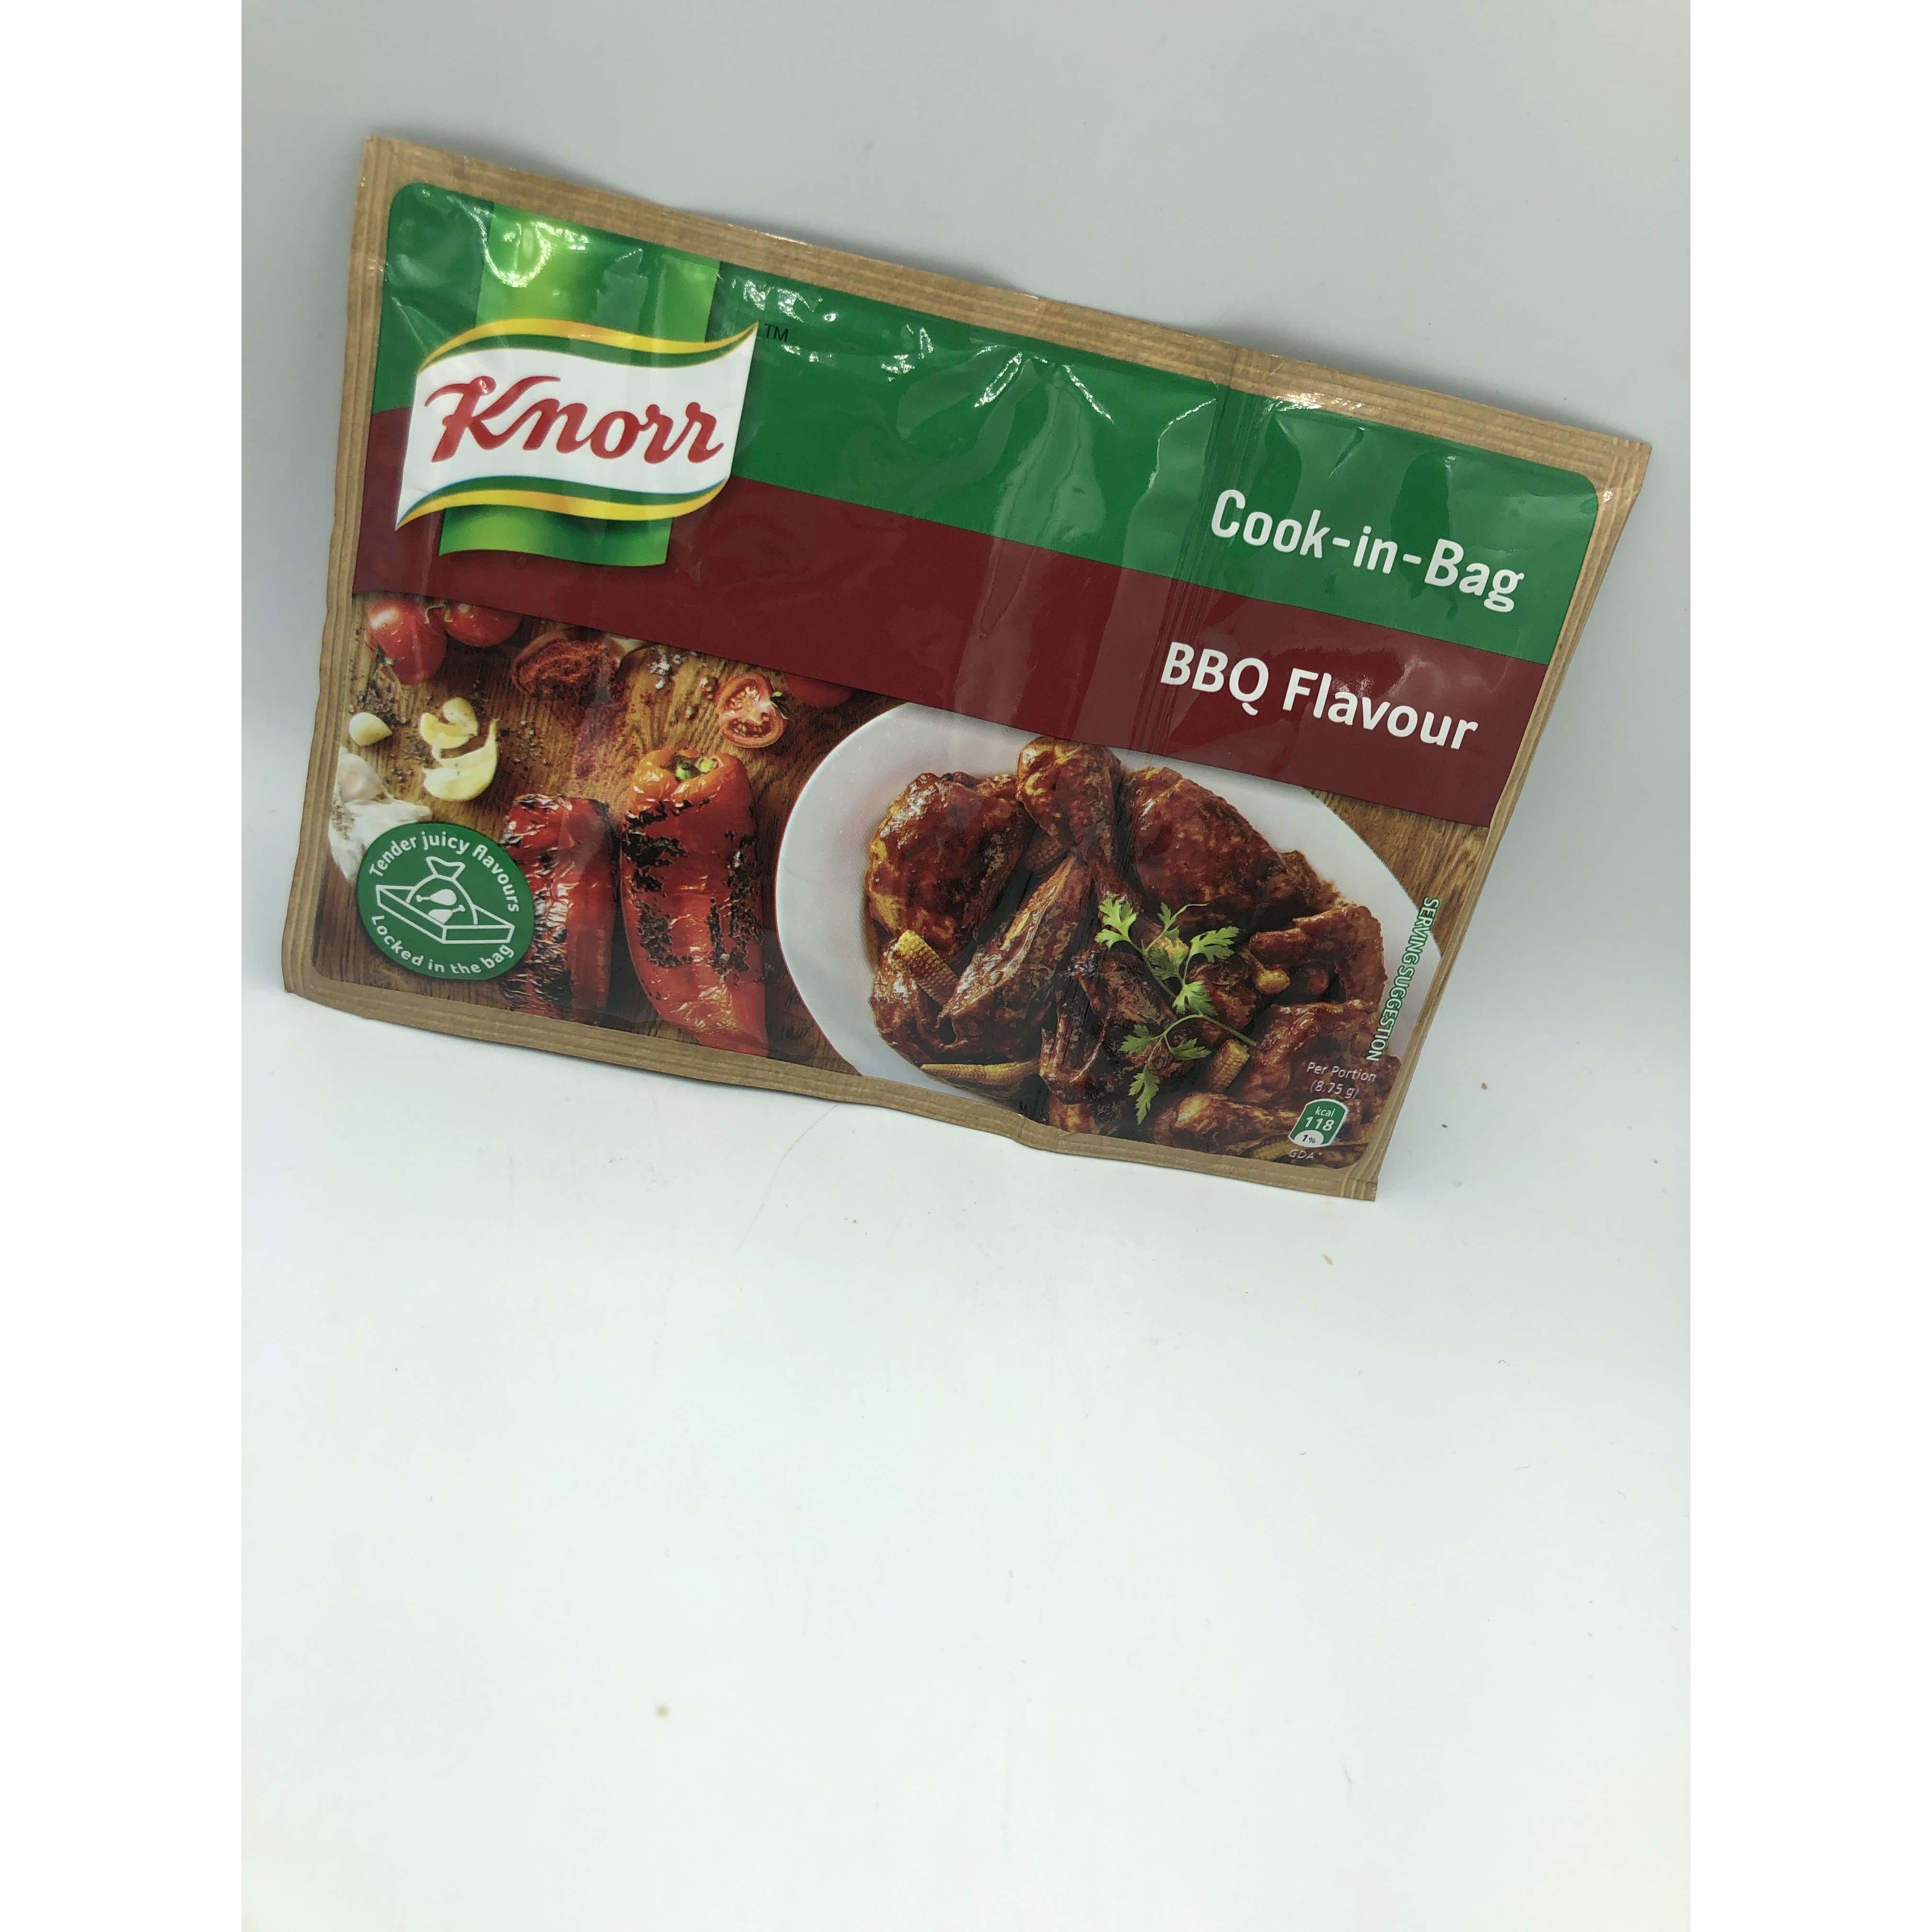 KNORR COOK-IN -BAG BBQ FLAVOUR 35G